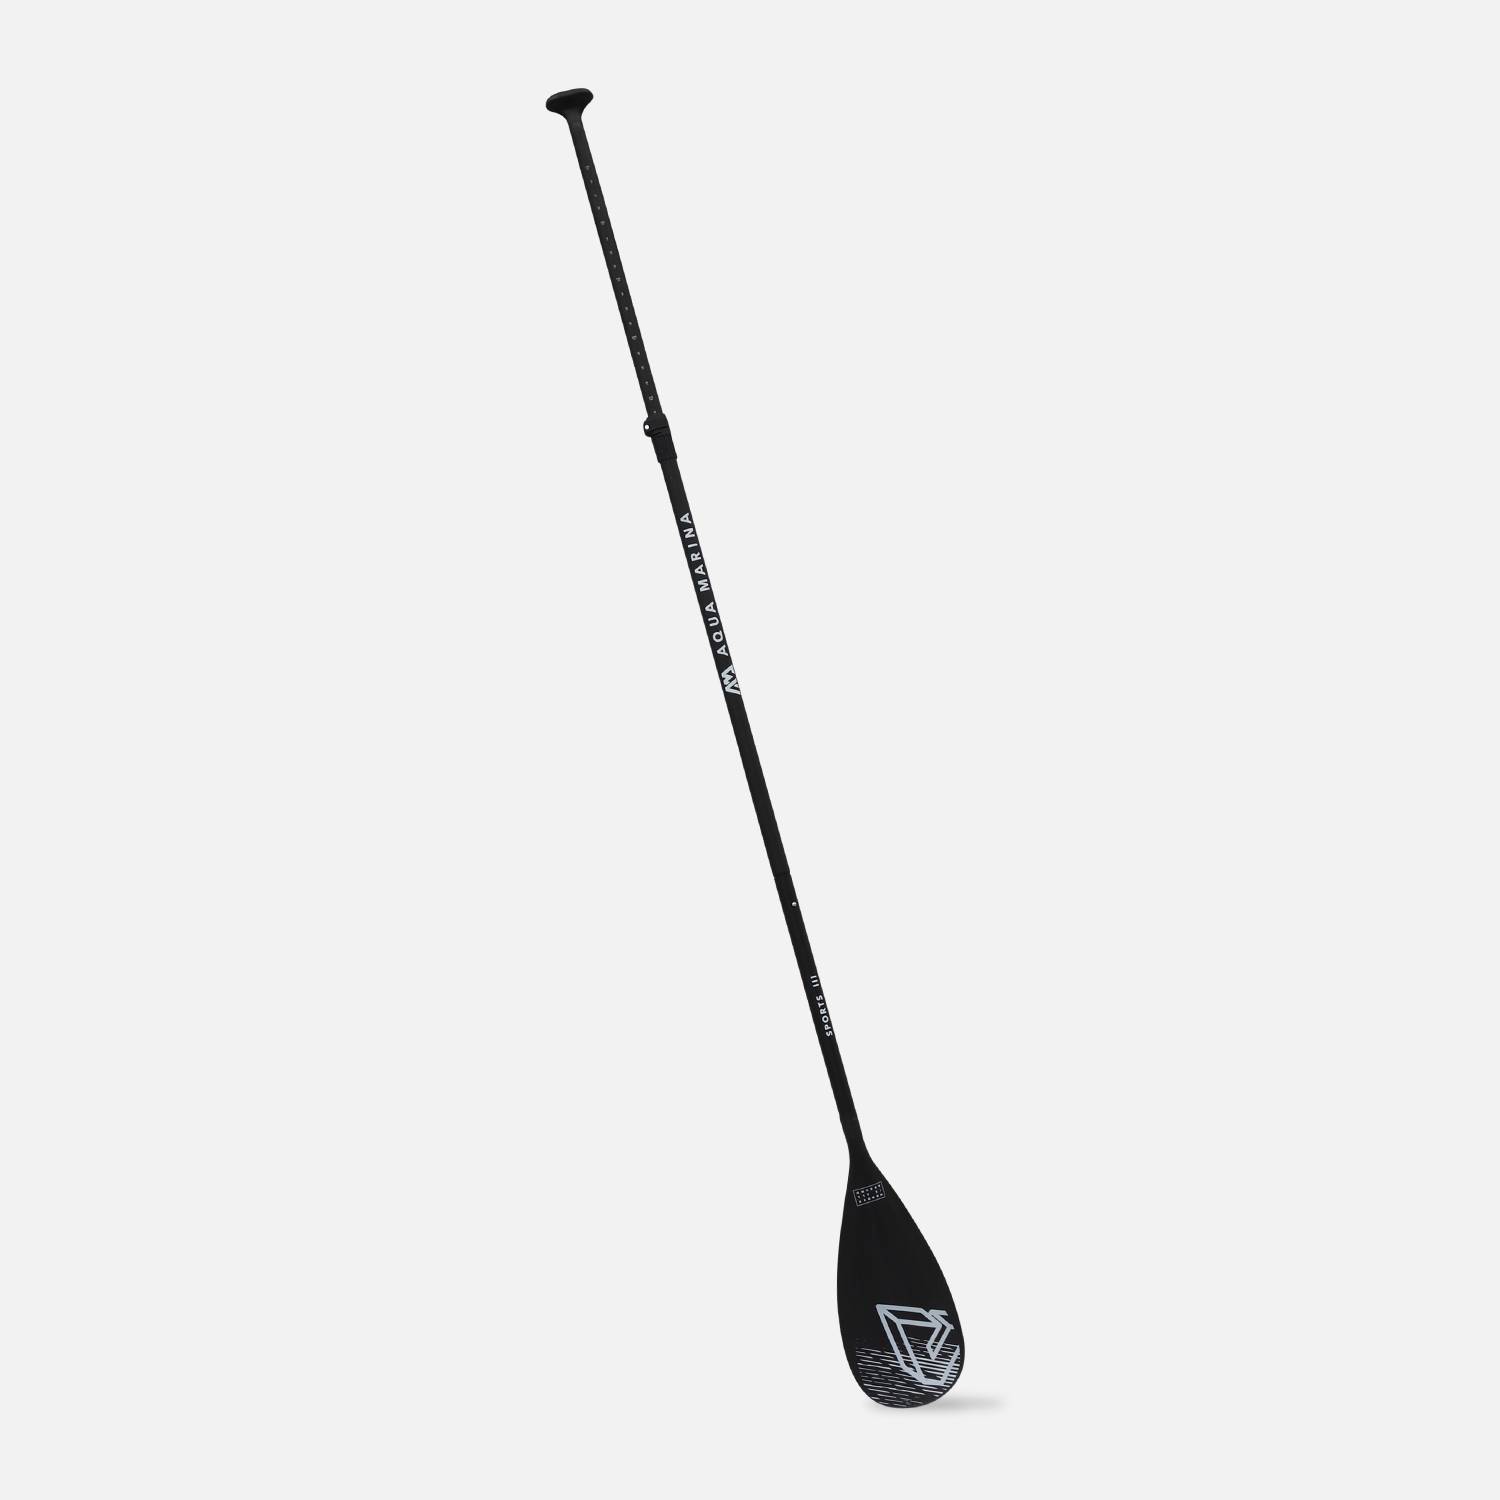 Aluminium paddle for stand up paddle (SUP) adjustable up to 210cm,sweeek,Photo1